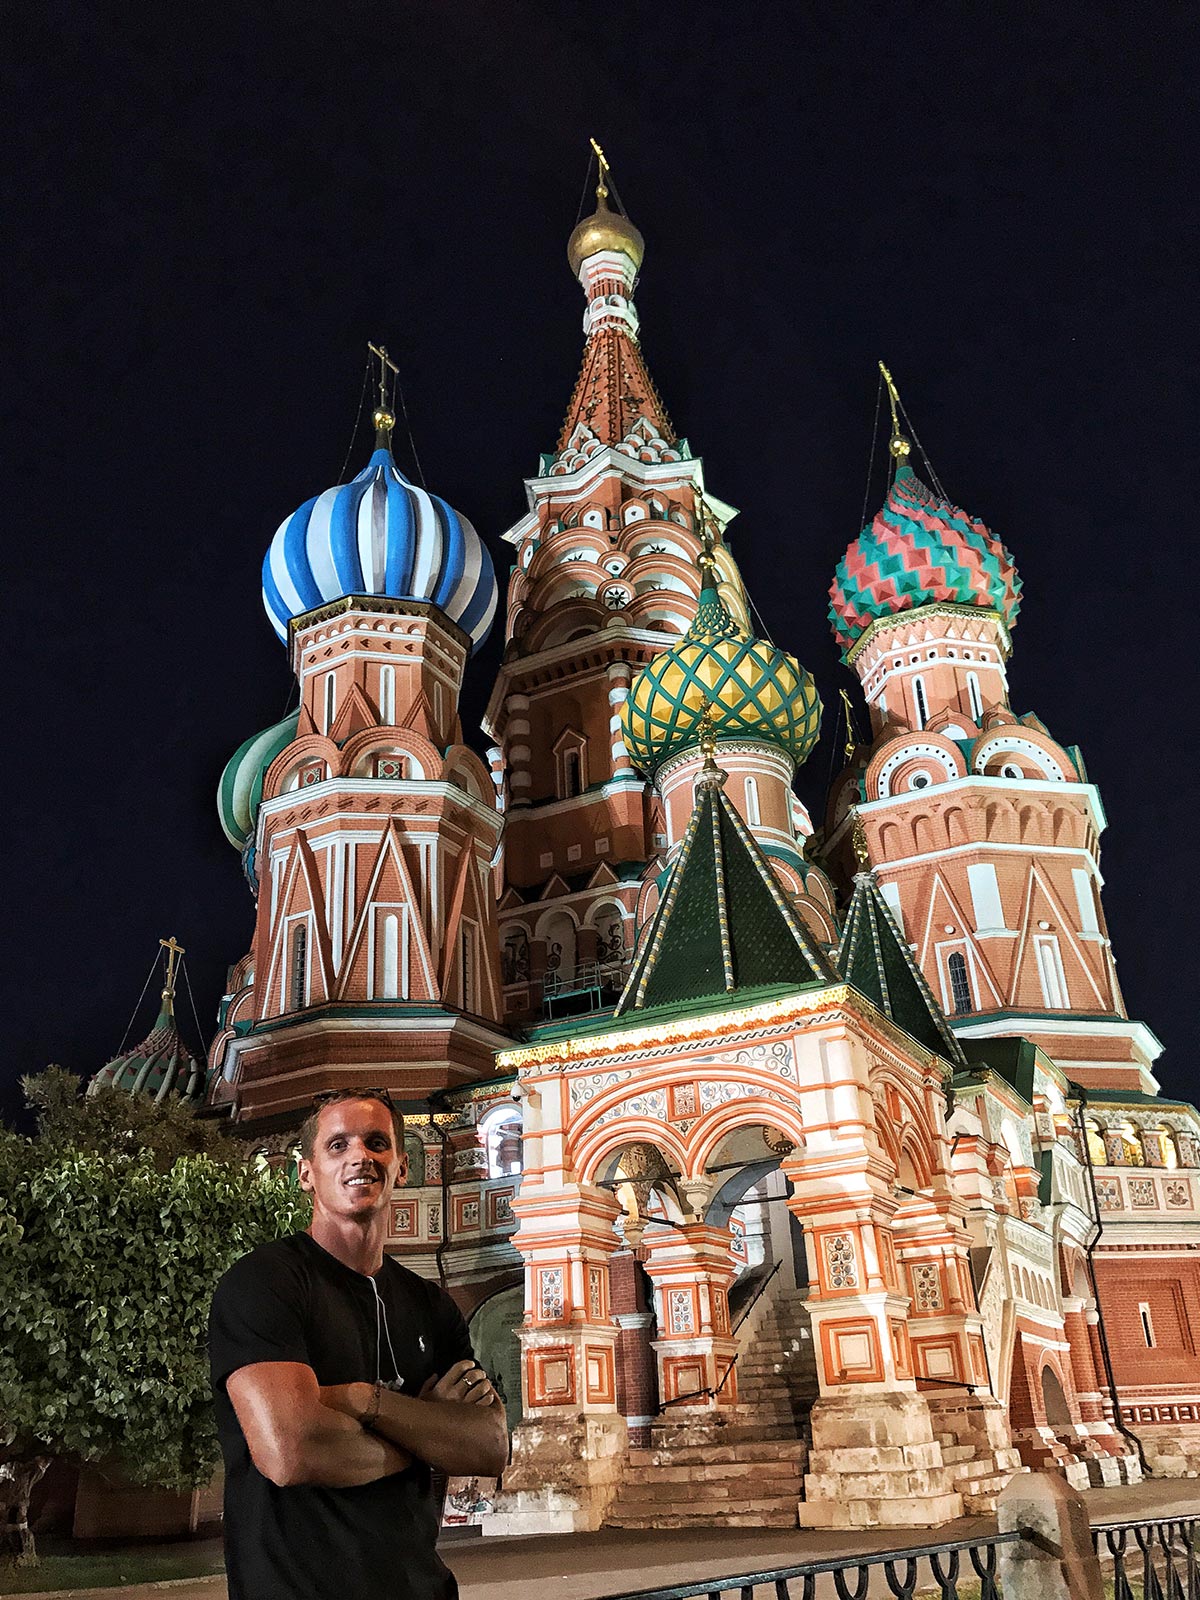 David Simpson at St. Basil's Cathedral in Moscow, Russia. Shocked by Moscow